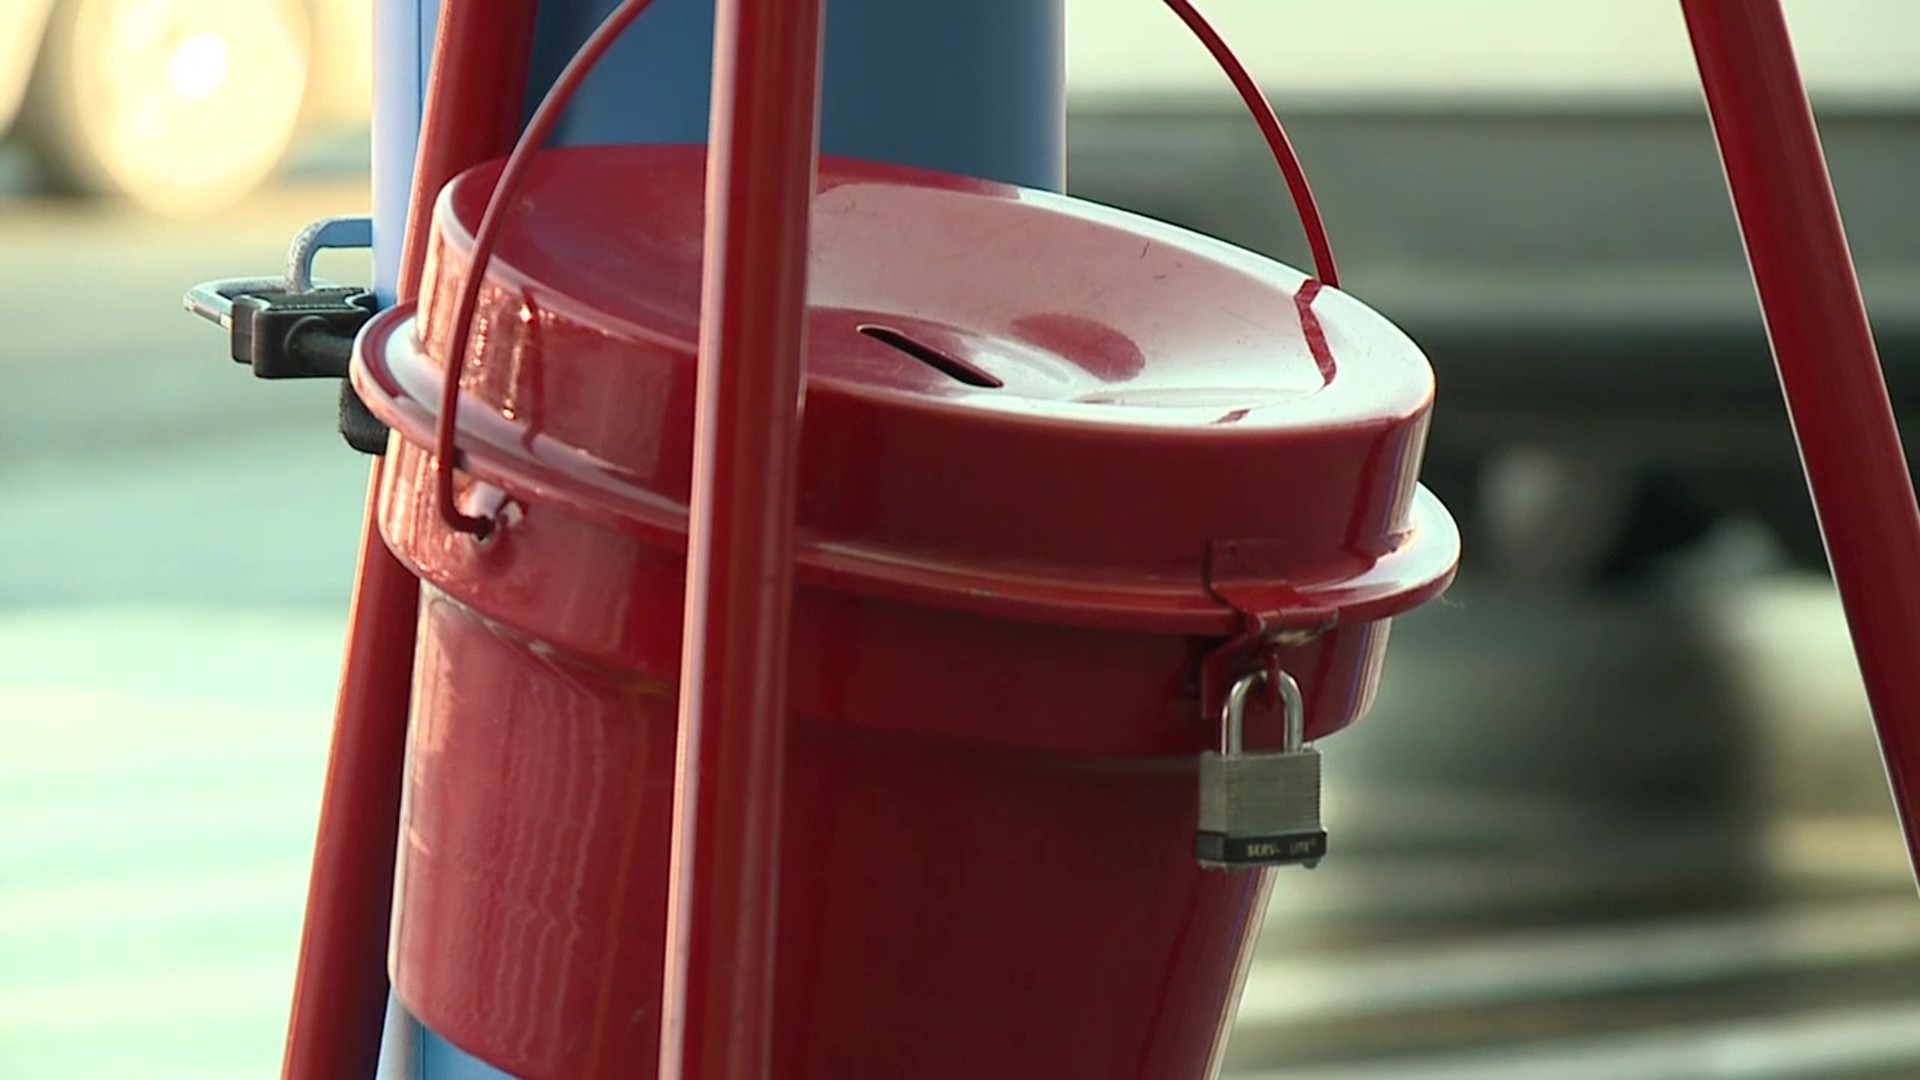 The "Virtual Red Kettle Campaign" has a goal of raising $250,000 online during the holiday season.